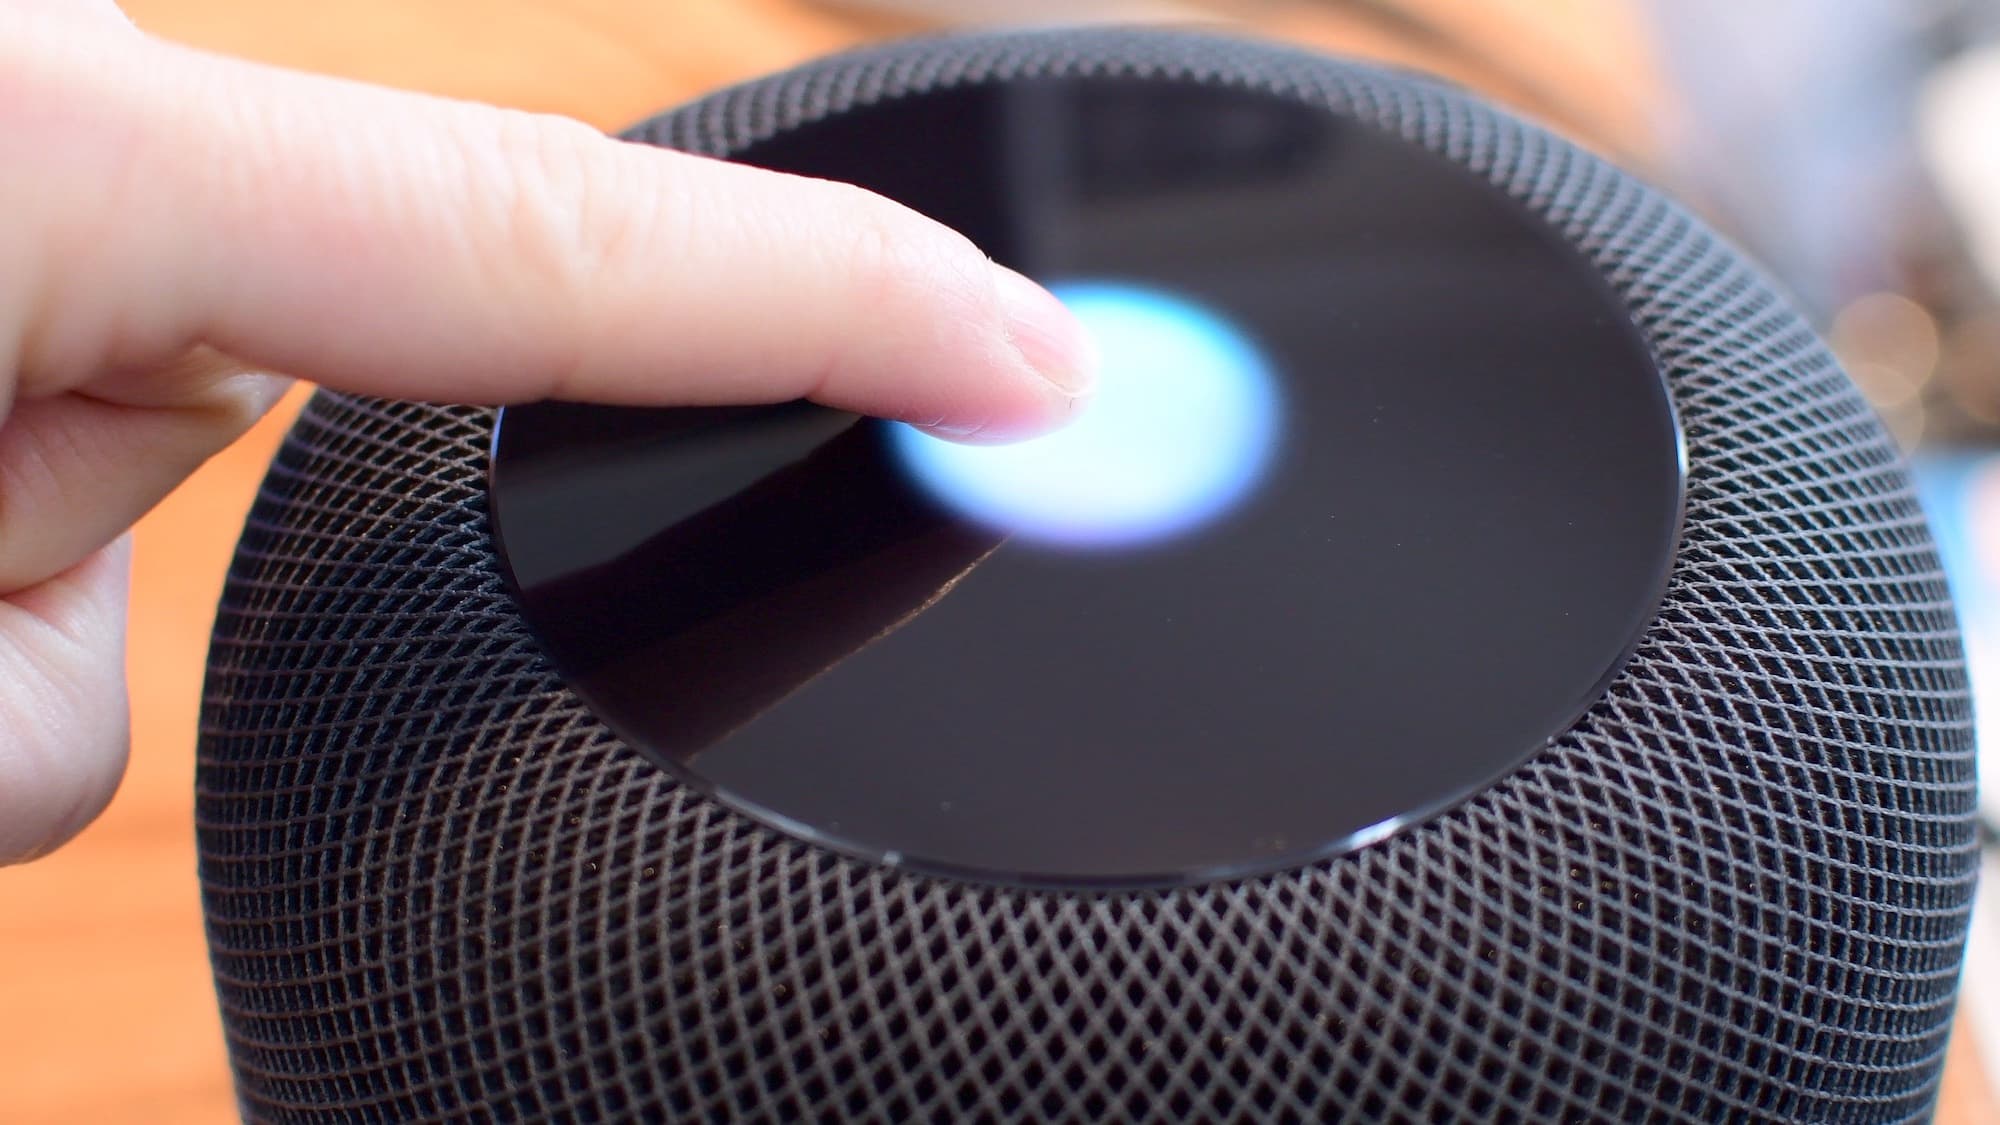 Touching the top of HomePod to control it